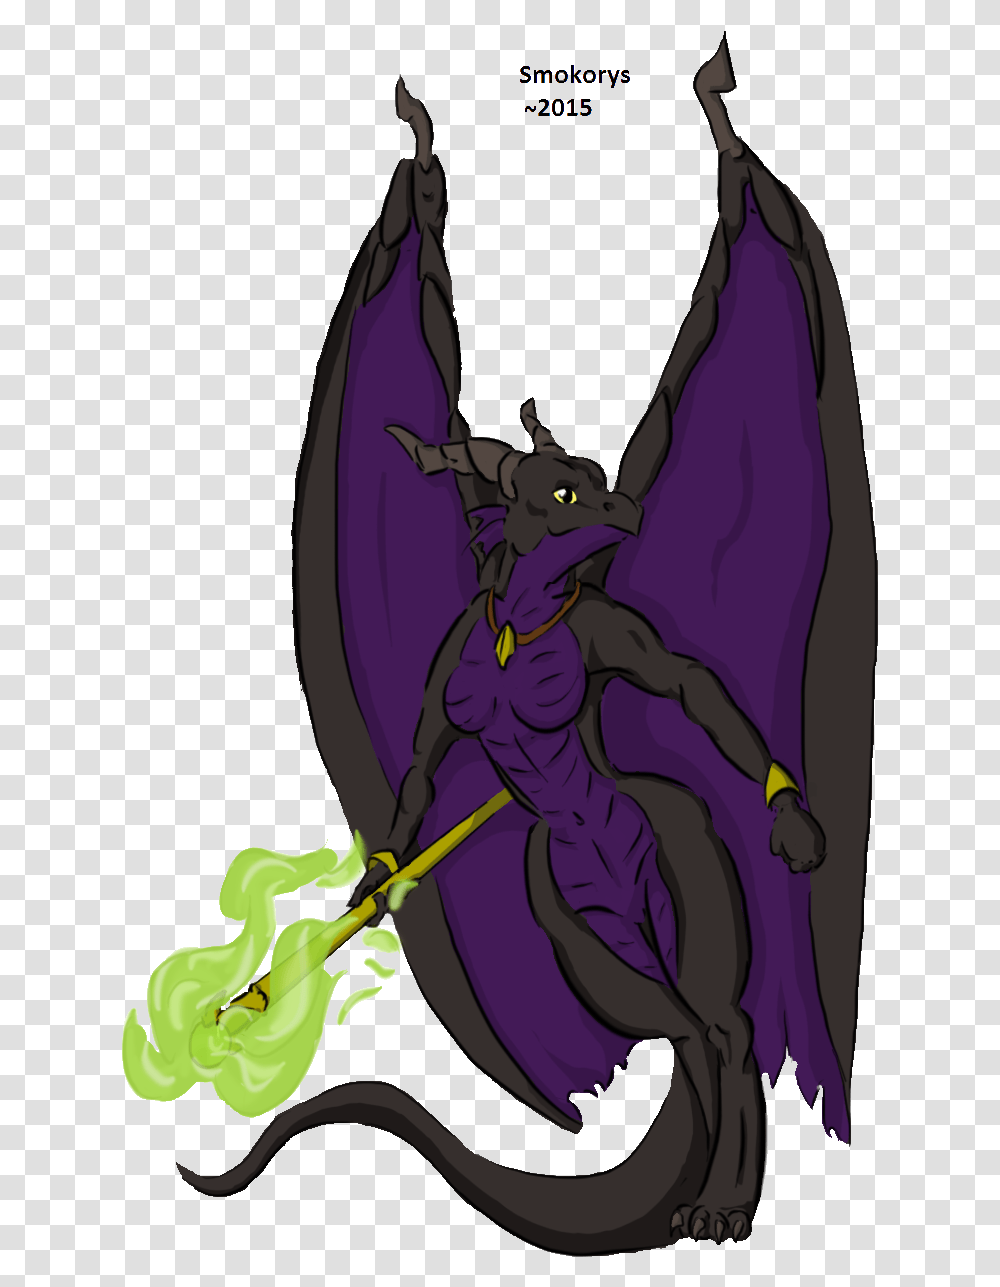 Anthro Dragon Form In Digital By Smokorys Maleficent Maleficent Dragon, Purple, Statue, Sculpture, Art Transparent Png